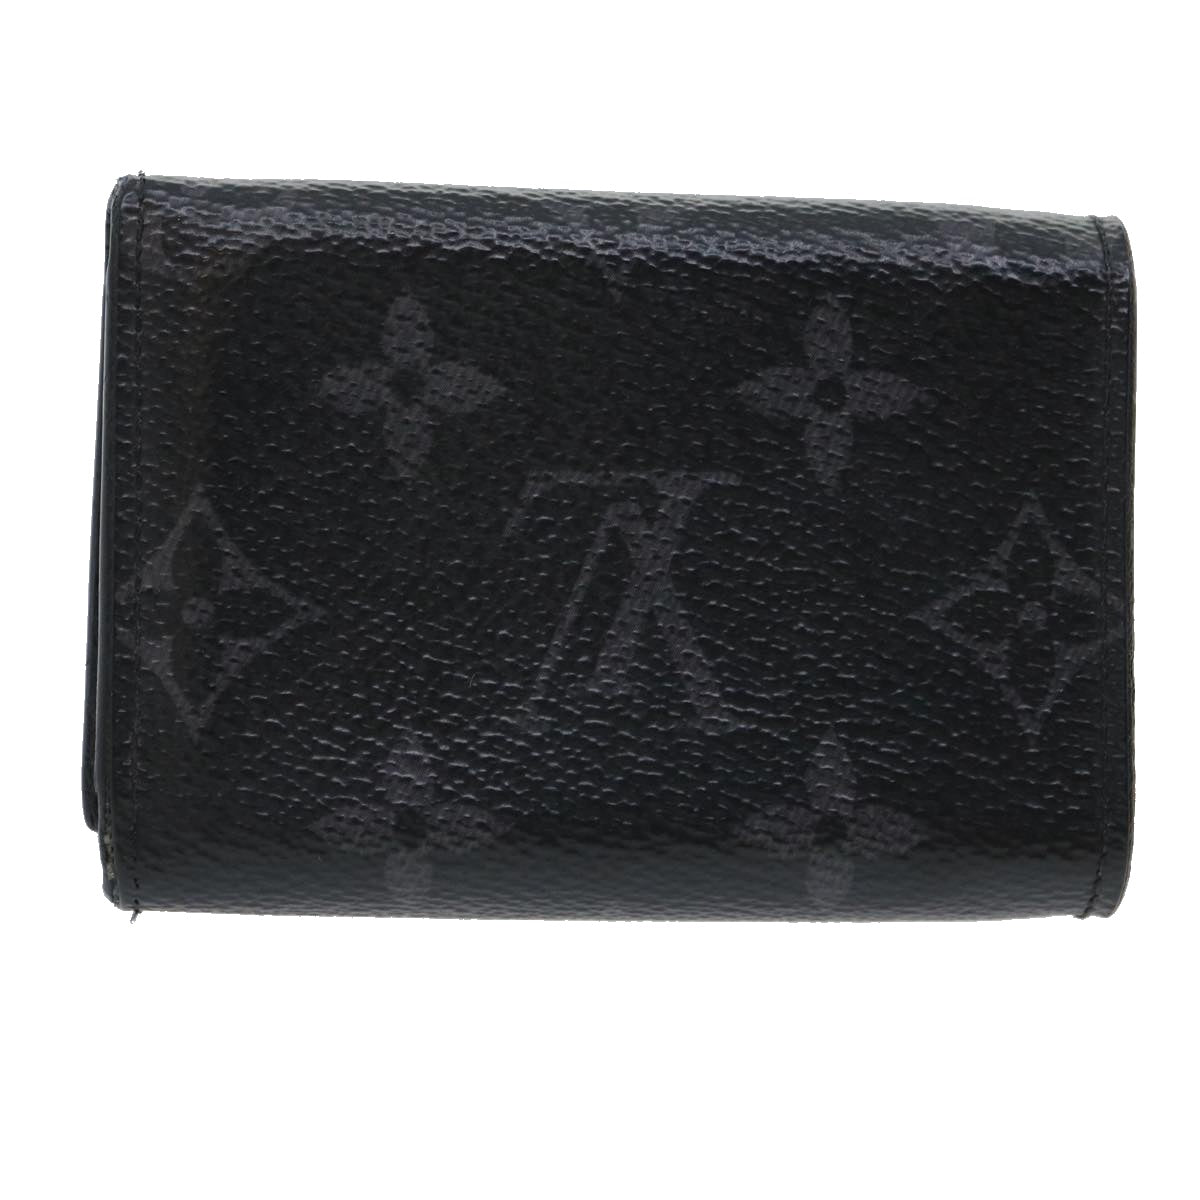 LOUISVUITTON Monogram Eclipse Reverse DiscoveryCompact Wallet M45417 Auth 30594 - 0